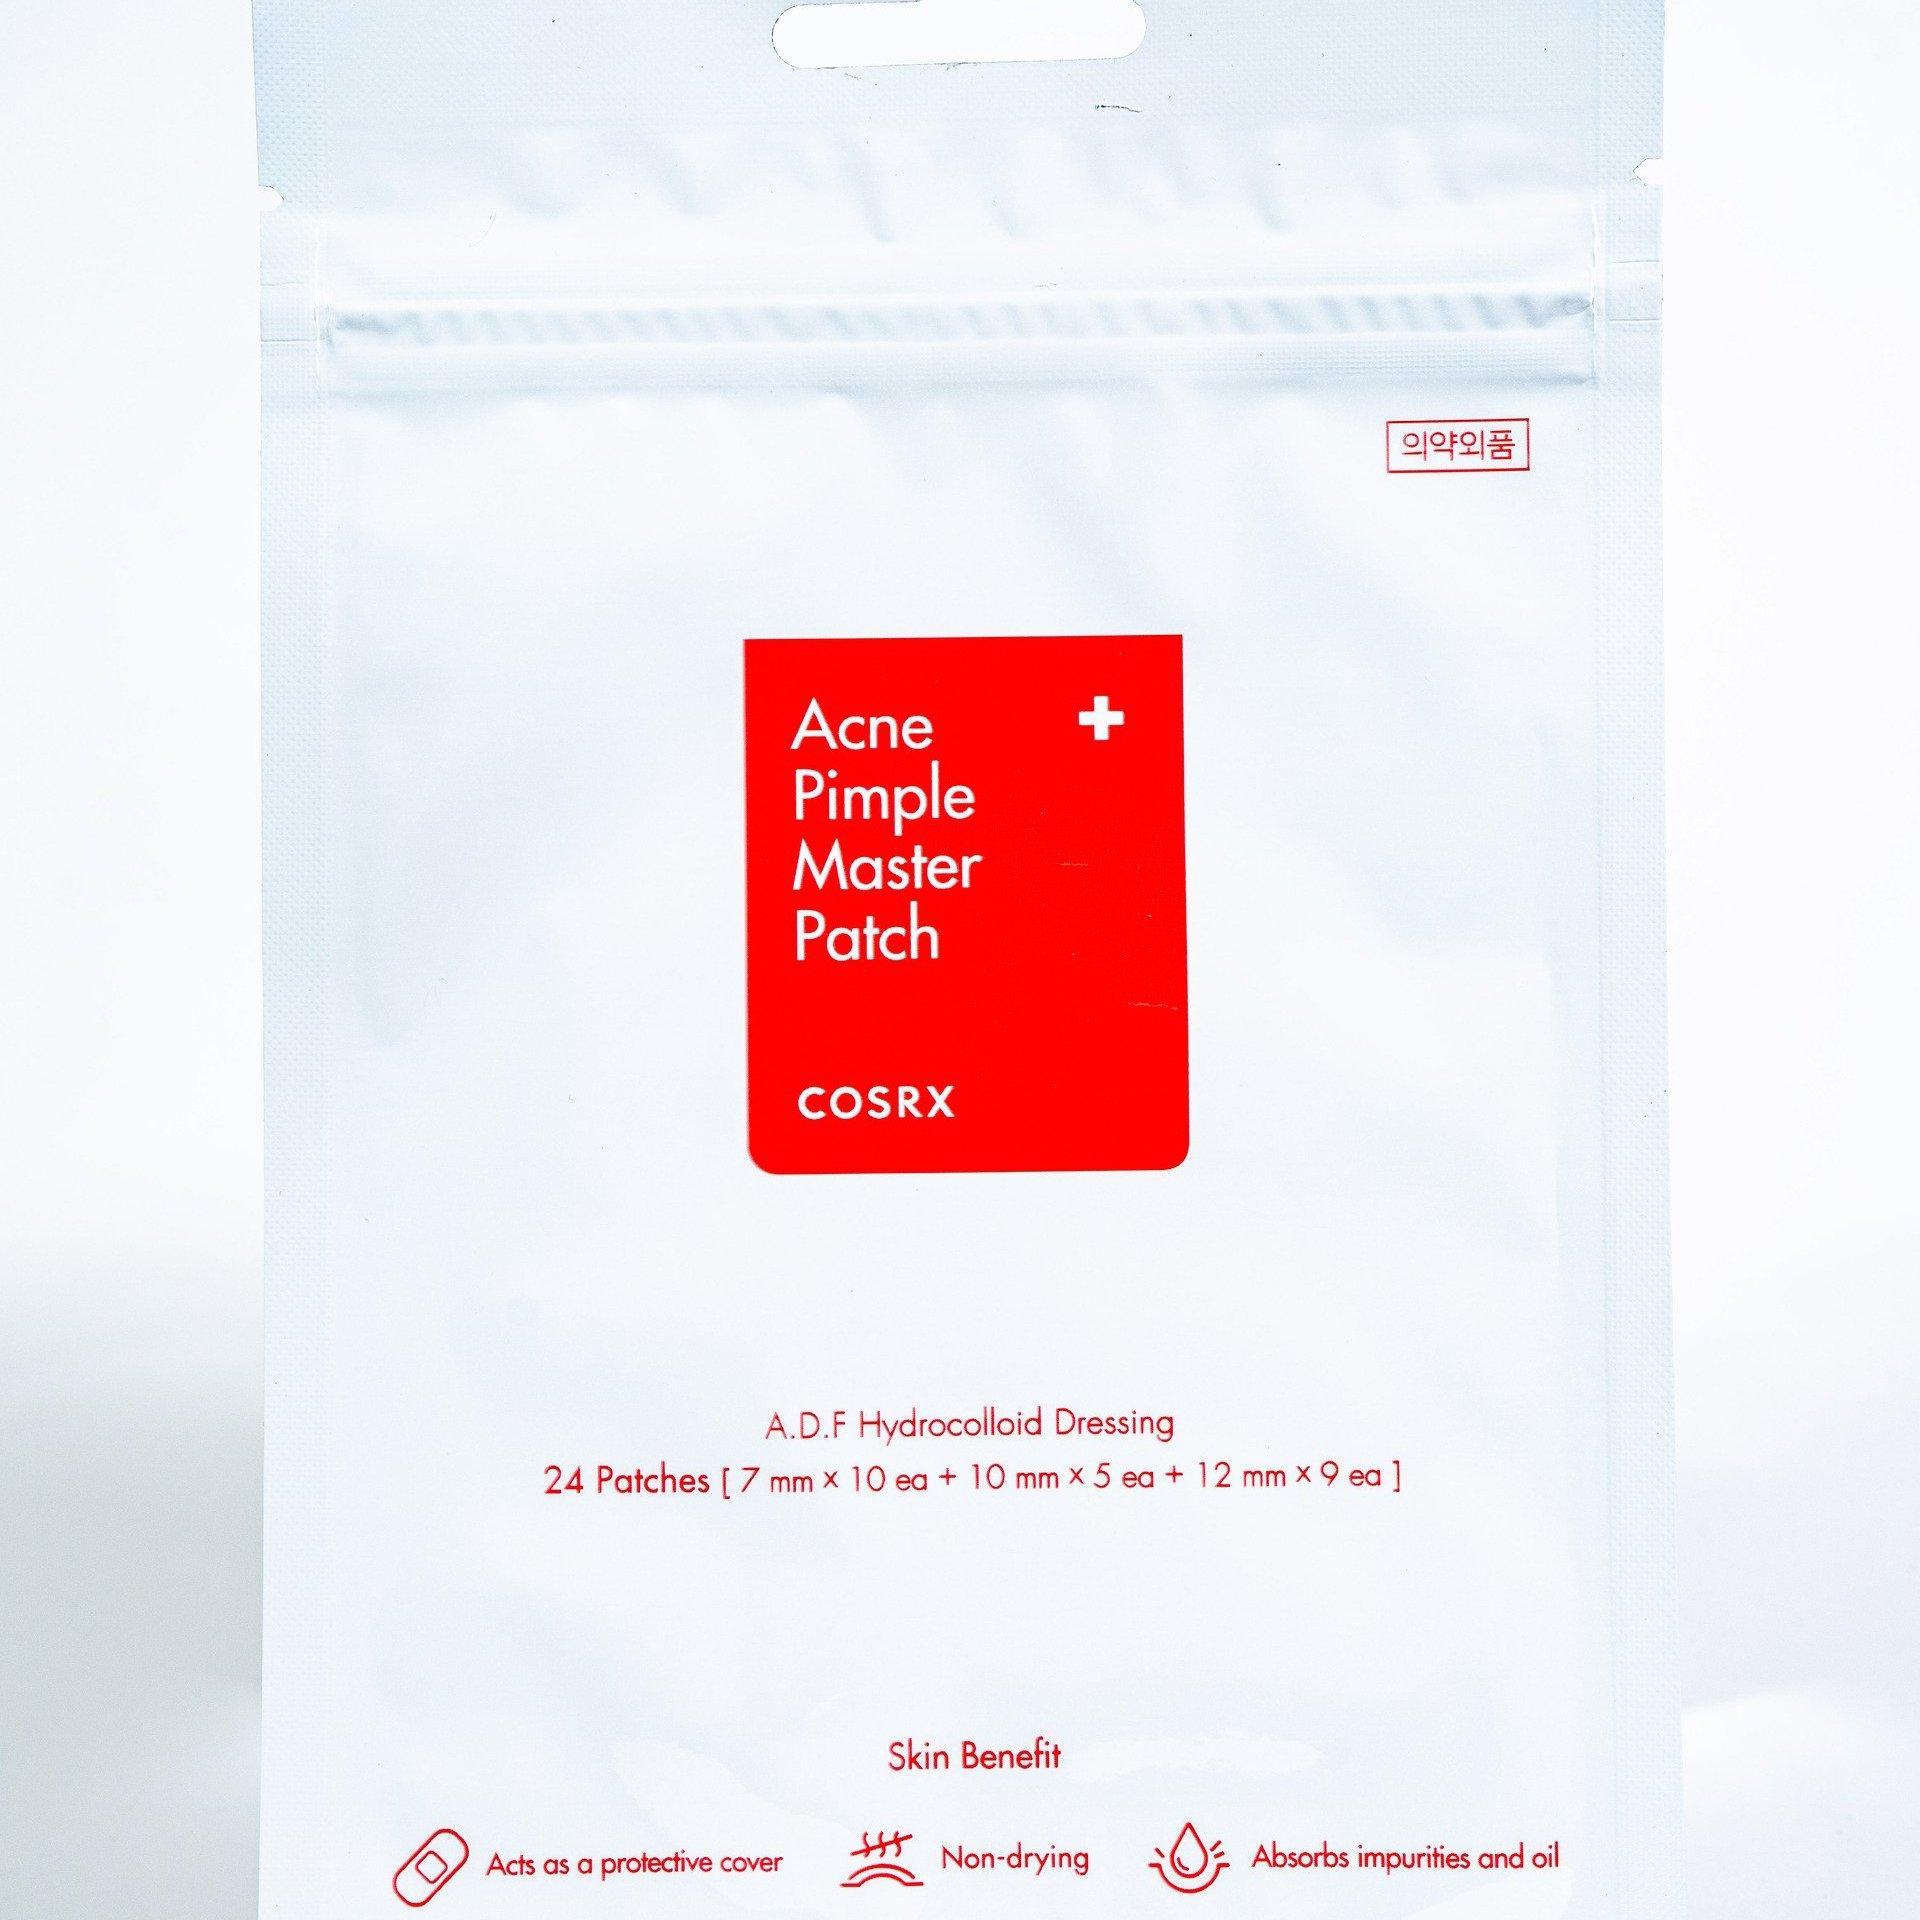 COSRX Acne Pimple Master 24 Patches